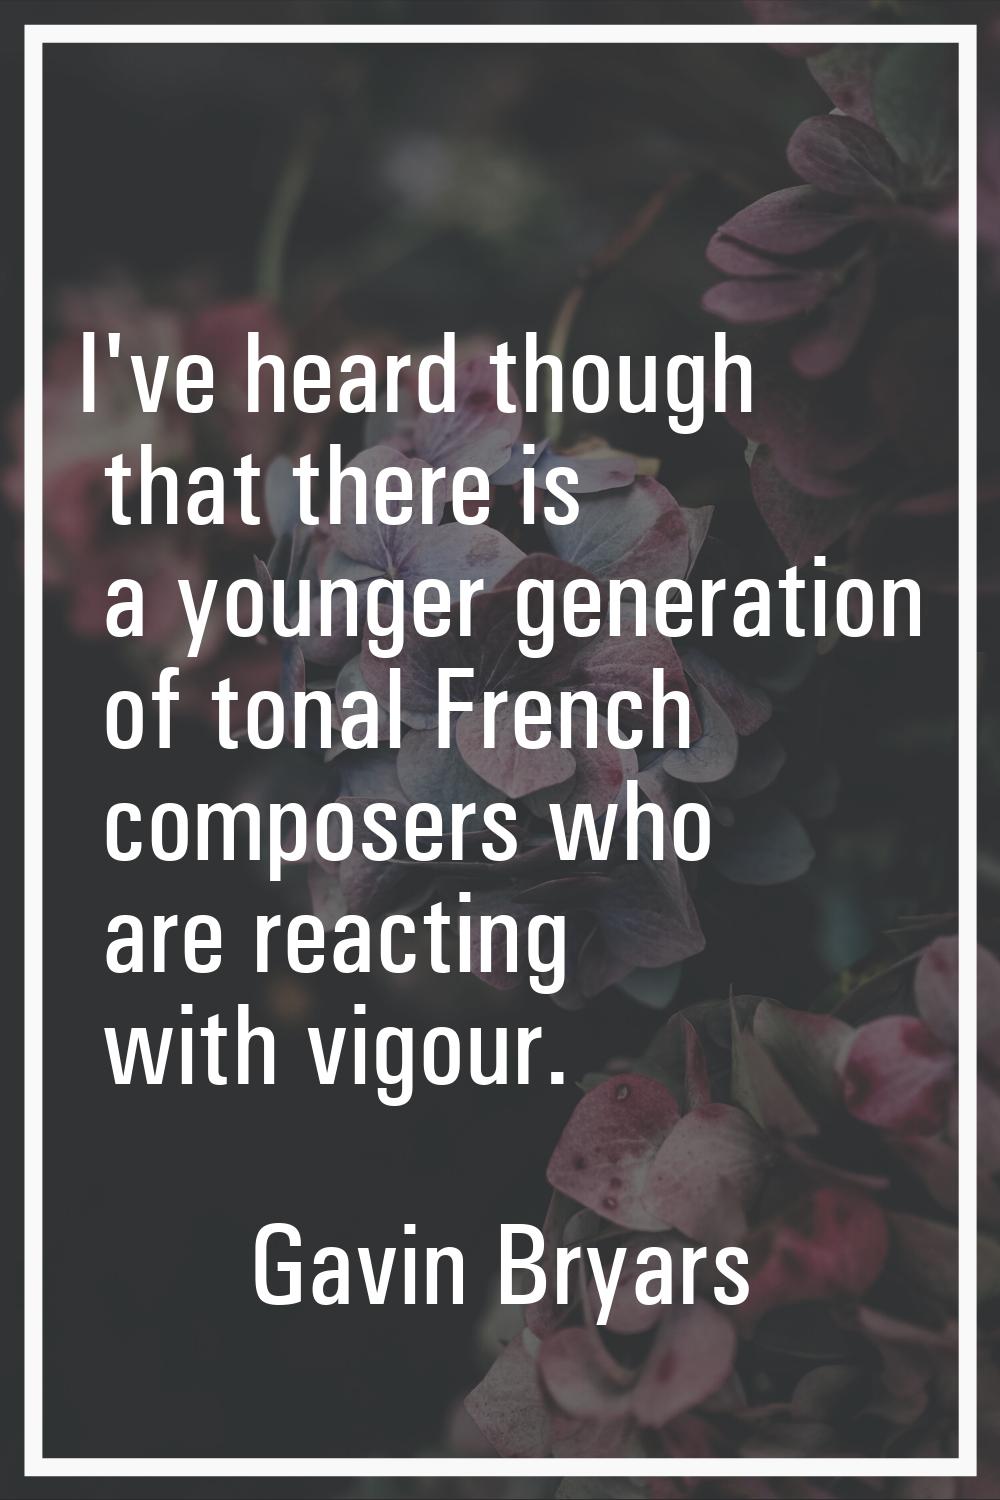 I've heard though that there is a younger generation of tonal French composers who are reacting wit